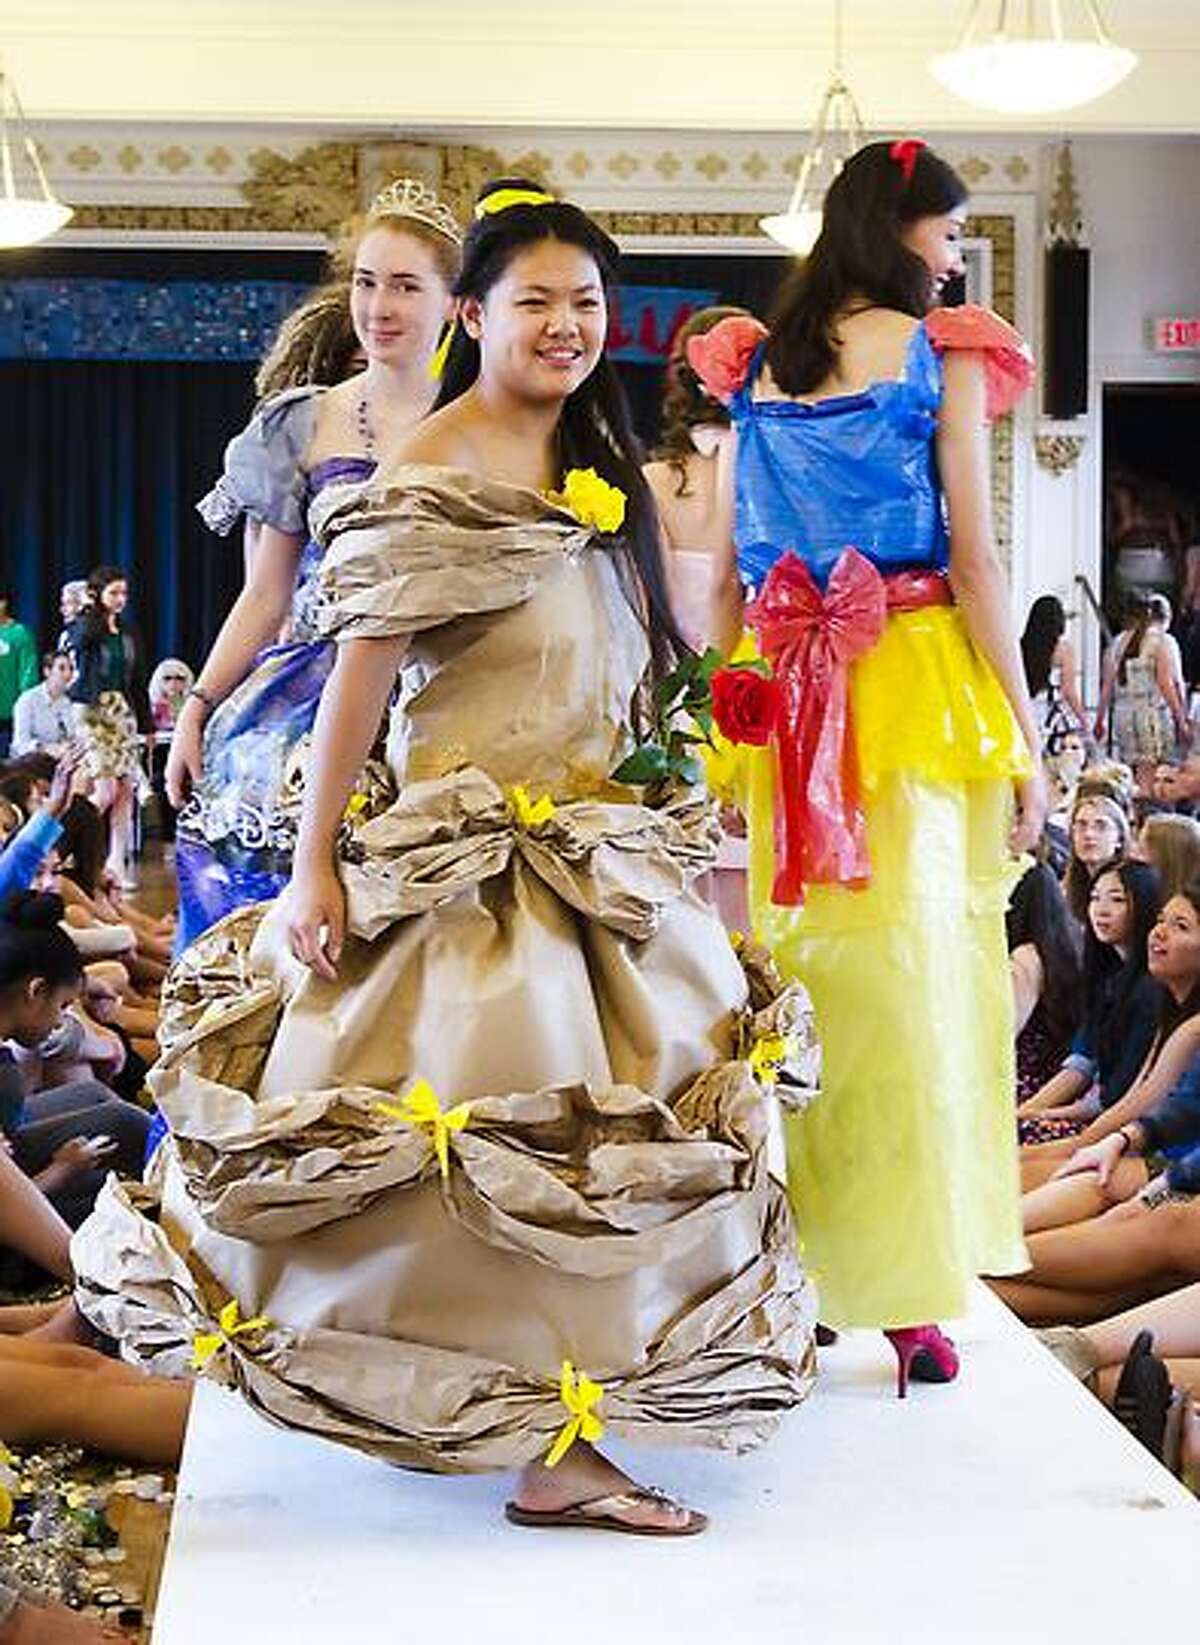 Lauralton Hall students model clothing made from recycled materials at an eco-fashion show in Milford. Melanie Stengel/Register